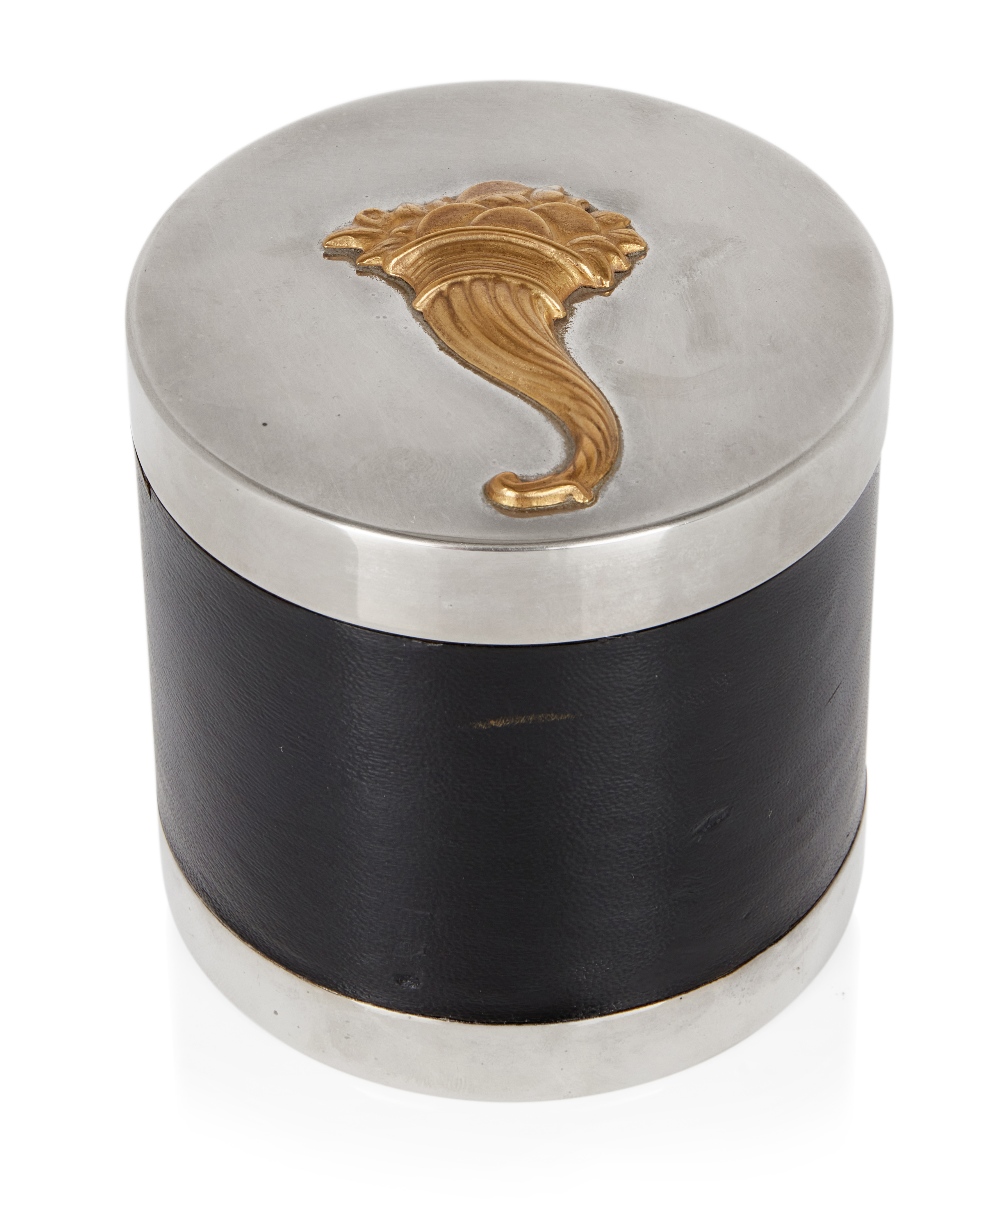 Hermes, Cylindrical box with cornucopia motif, circa 1960, Silver plate, gold plate, leather,